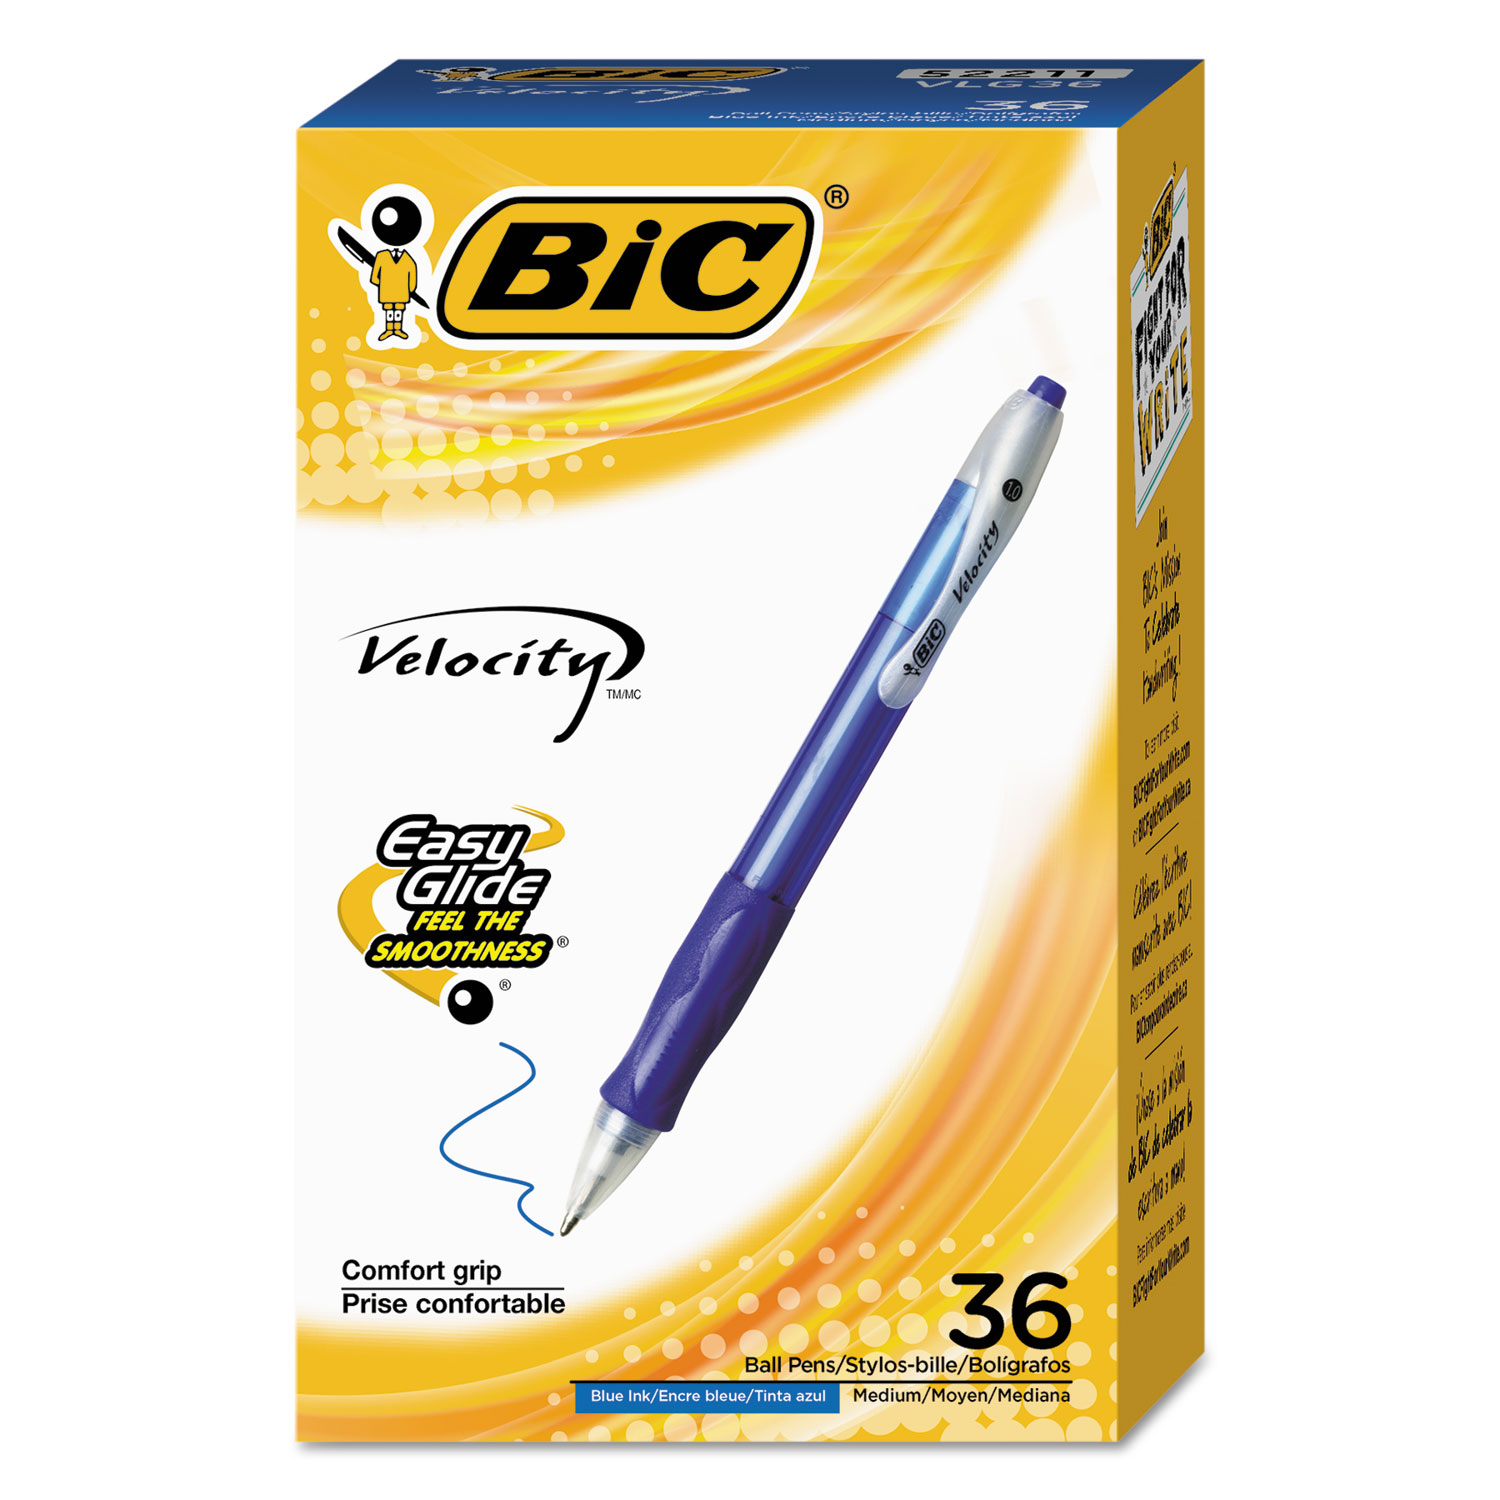  BIC Soft Feel Blue Retractable Ballpoint Pens, Medium Point  (1.0mm), 12-Count Pack, Blue Pens With Soft-Touch Comfort Grip : Bic Soft  Feel Med Blue : Office Products